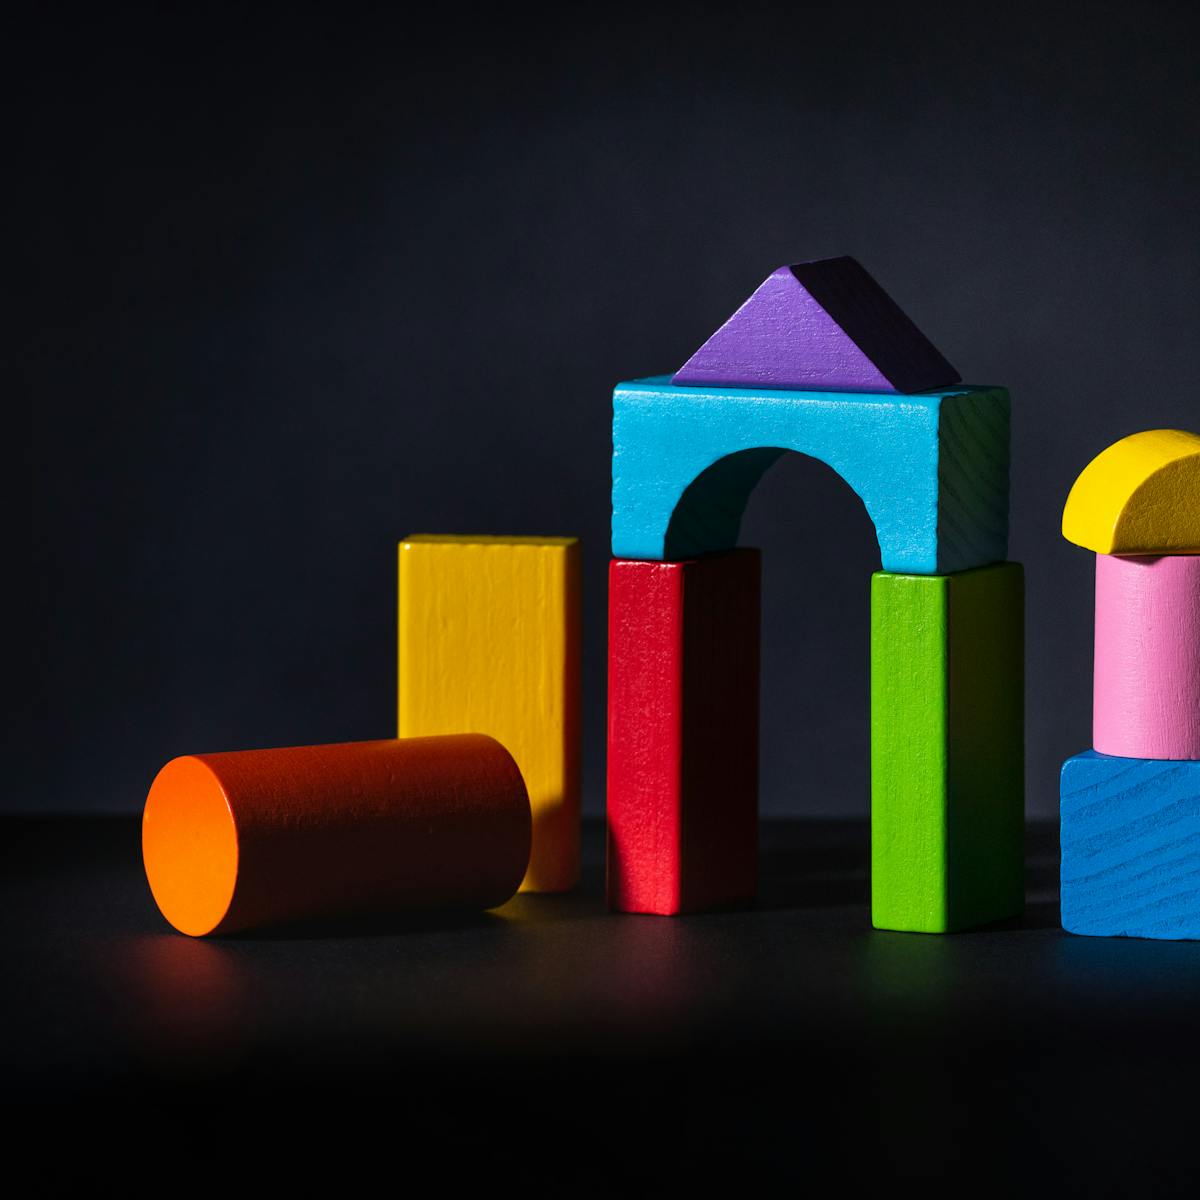 A photograph of multi coloured wooden blocks against a black background. The blocks are of various shapes and stacked on top of each other. The blocks appear so that half of the block is in dark shadow and silhouette.
